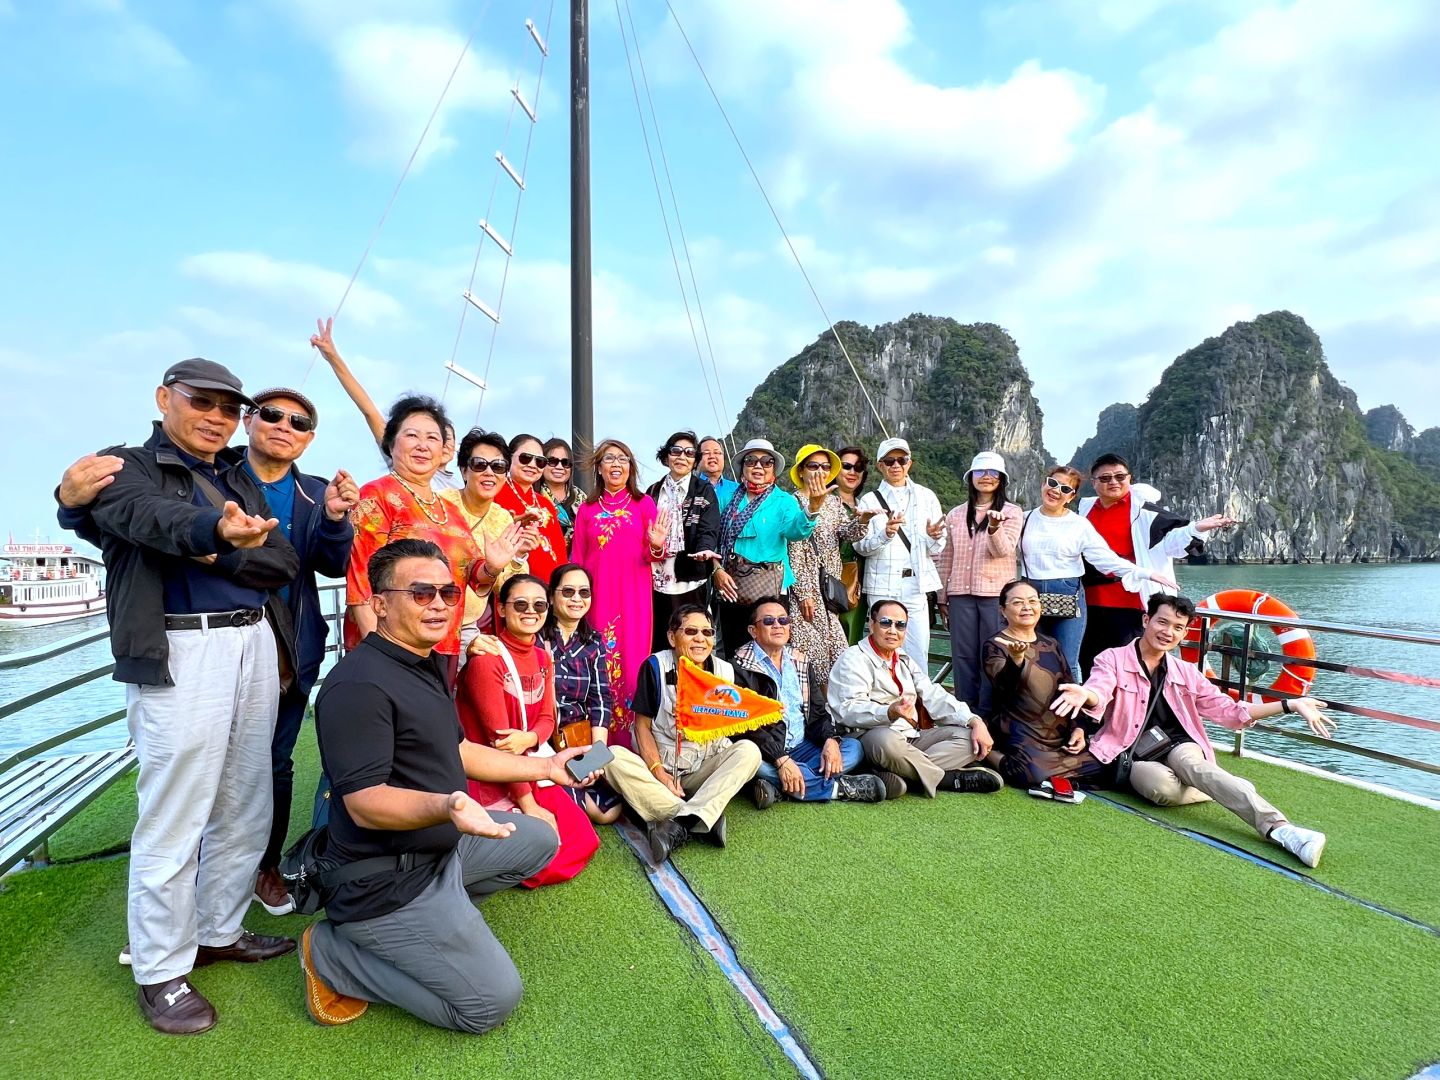 A tour group visit Halong Bay organized by Viet Top Travel